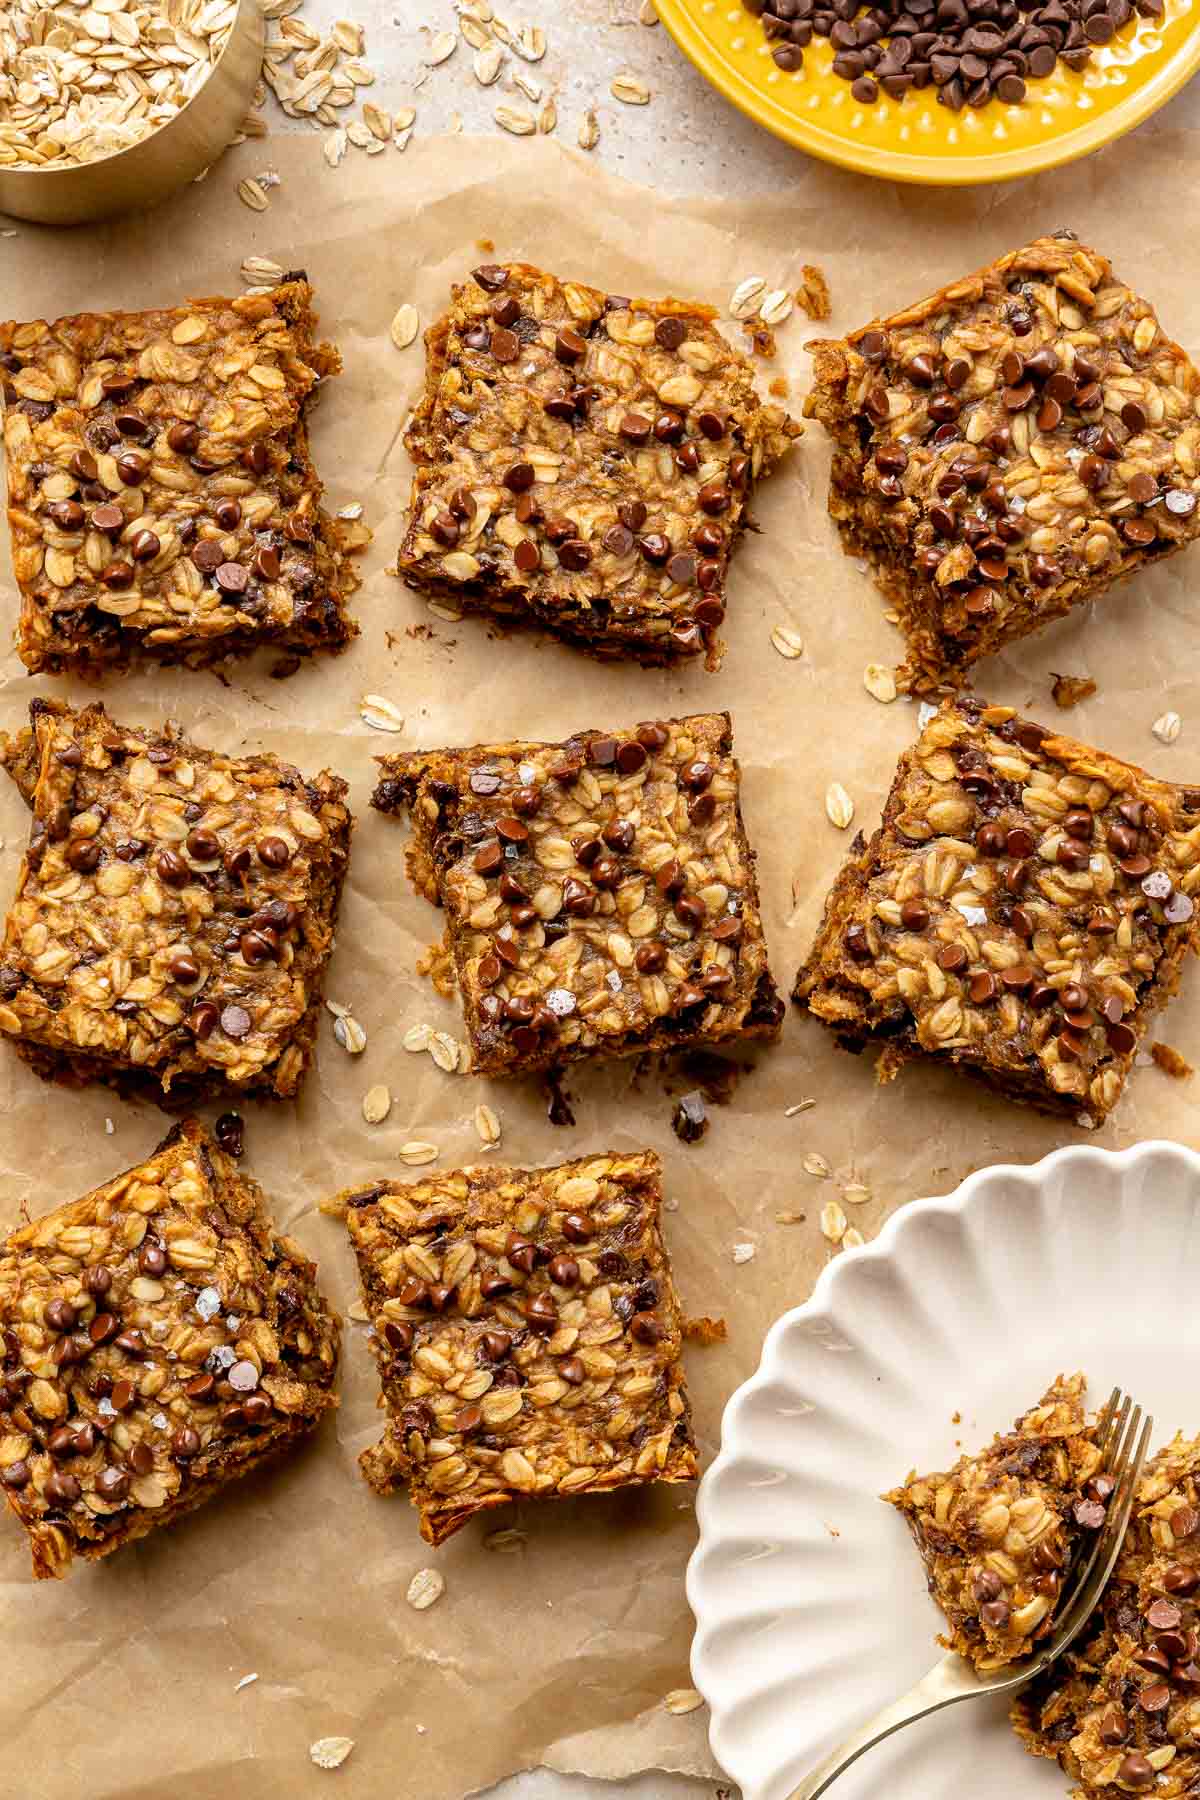 Oatmeal bars with chocolate chips on parchment paper.